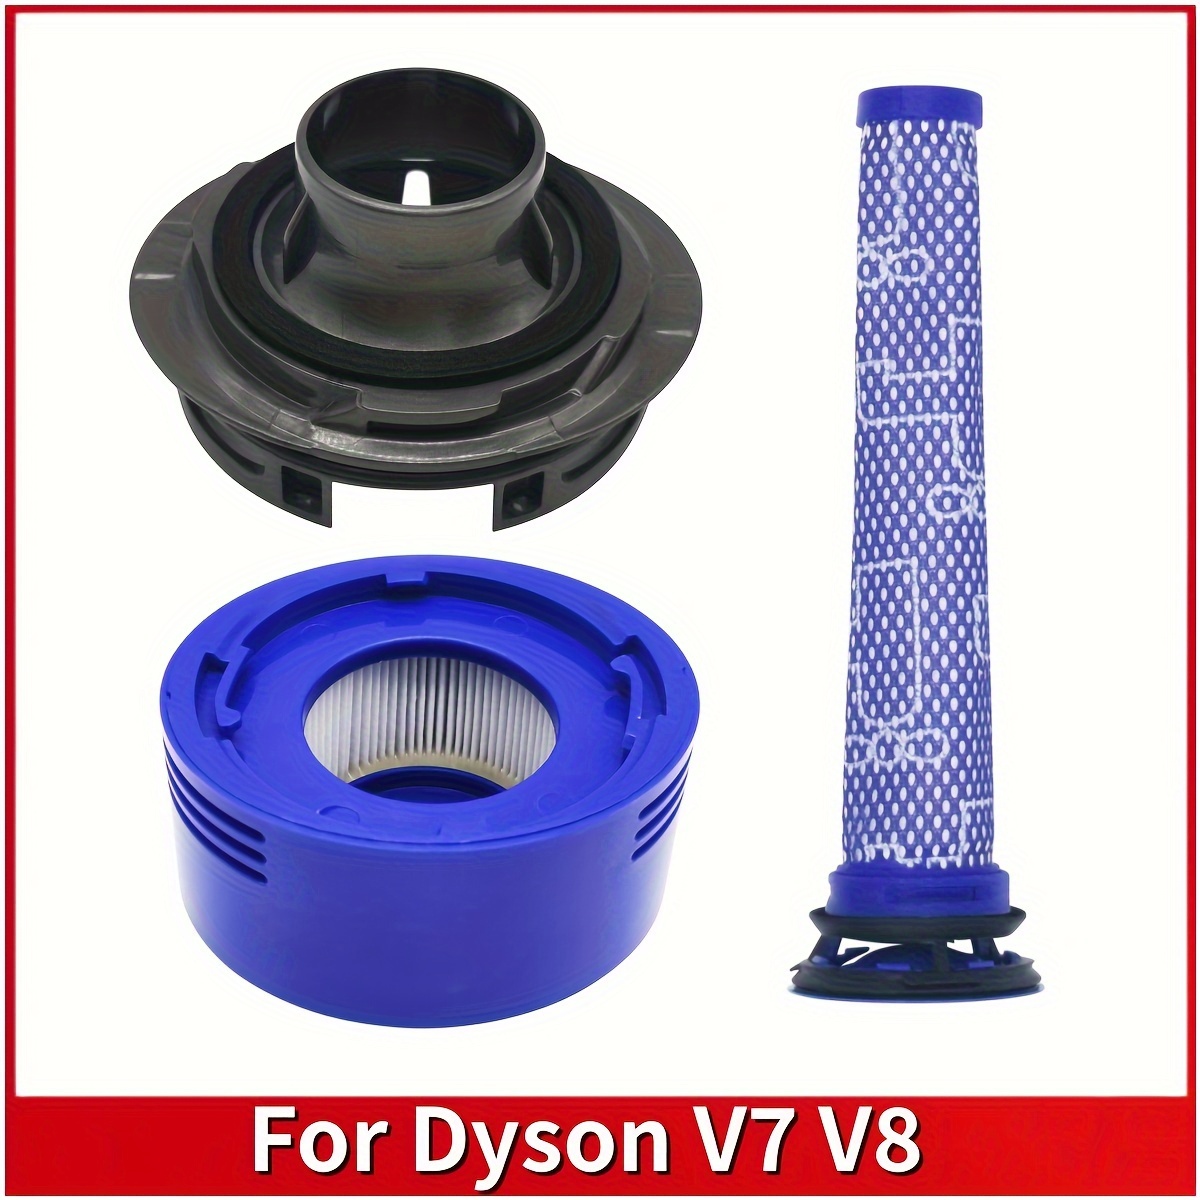  6 Pack Filter Replacement for Dyson V7 V8 SV10 Animal Absolute  Motorhead Cordless Vacuum Cleaner, 3 Post Motor Filters & 3 Pre HEPA Filter  Replacements, Compare to Part # DY-96566101 & DY-96747801